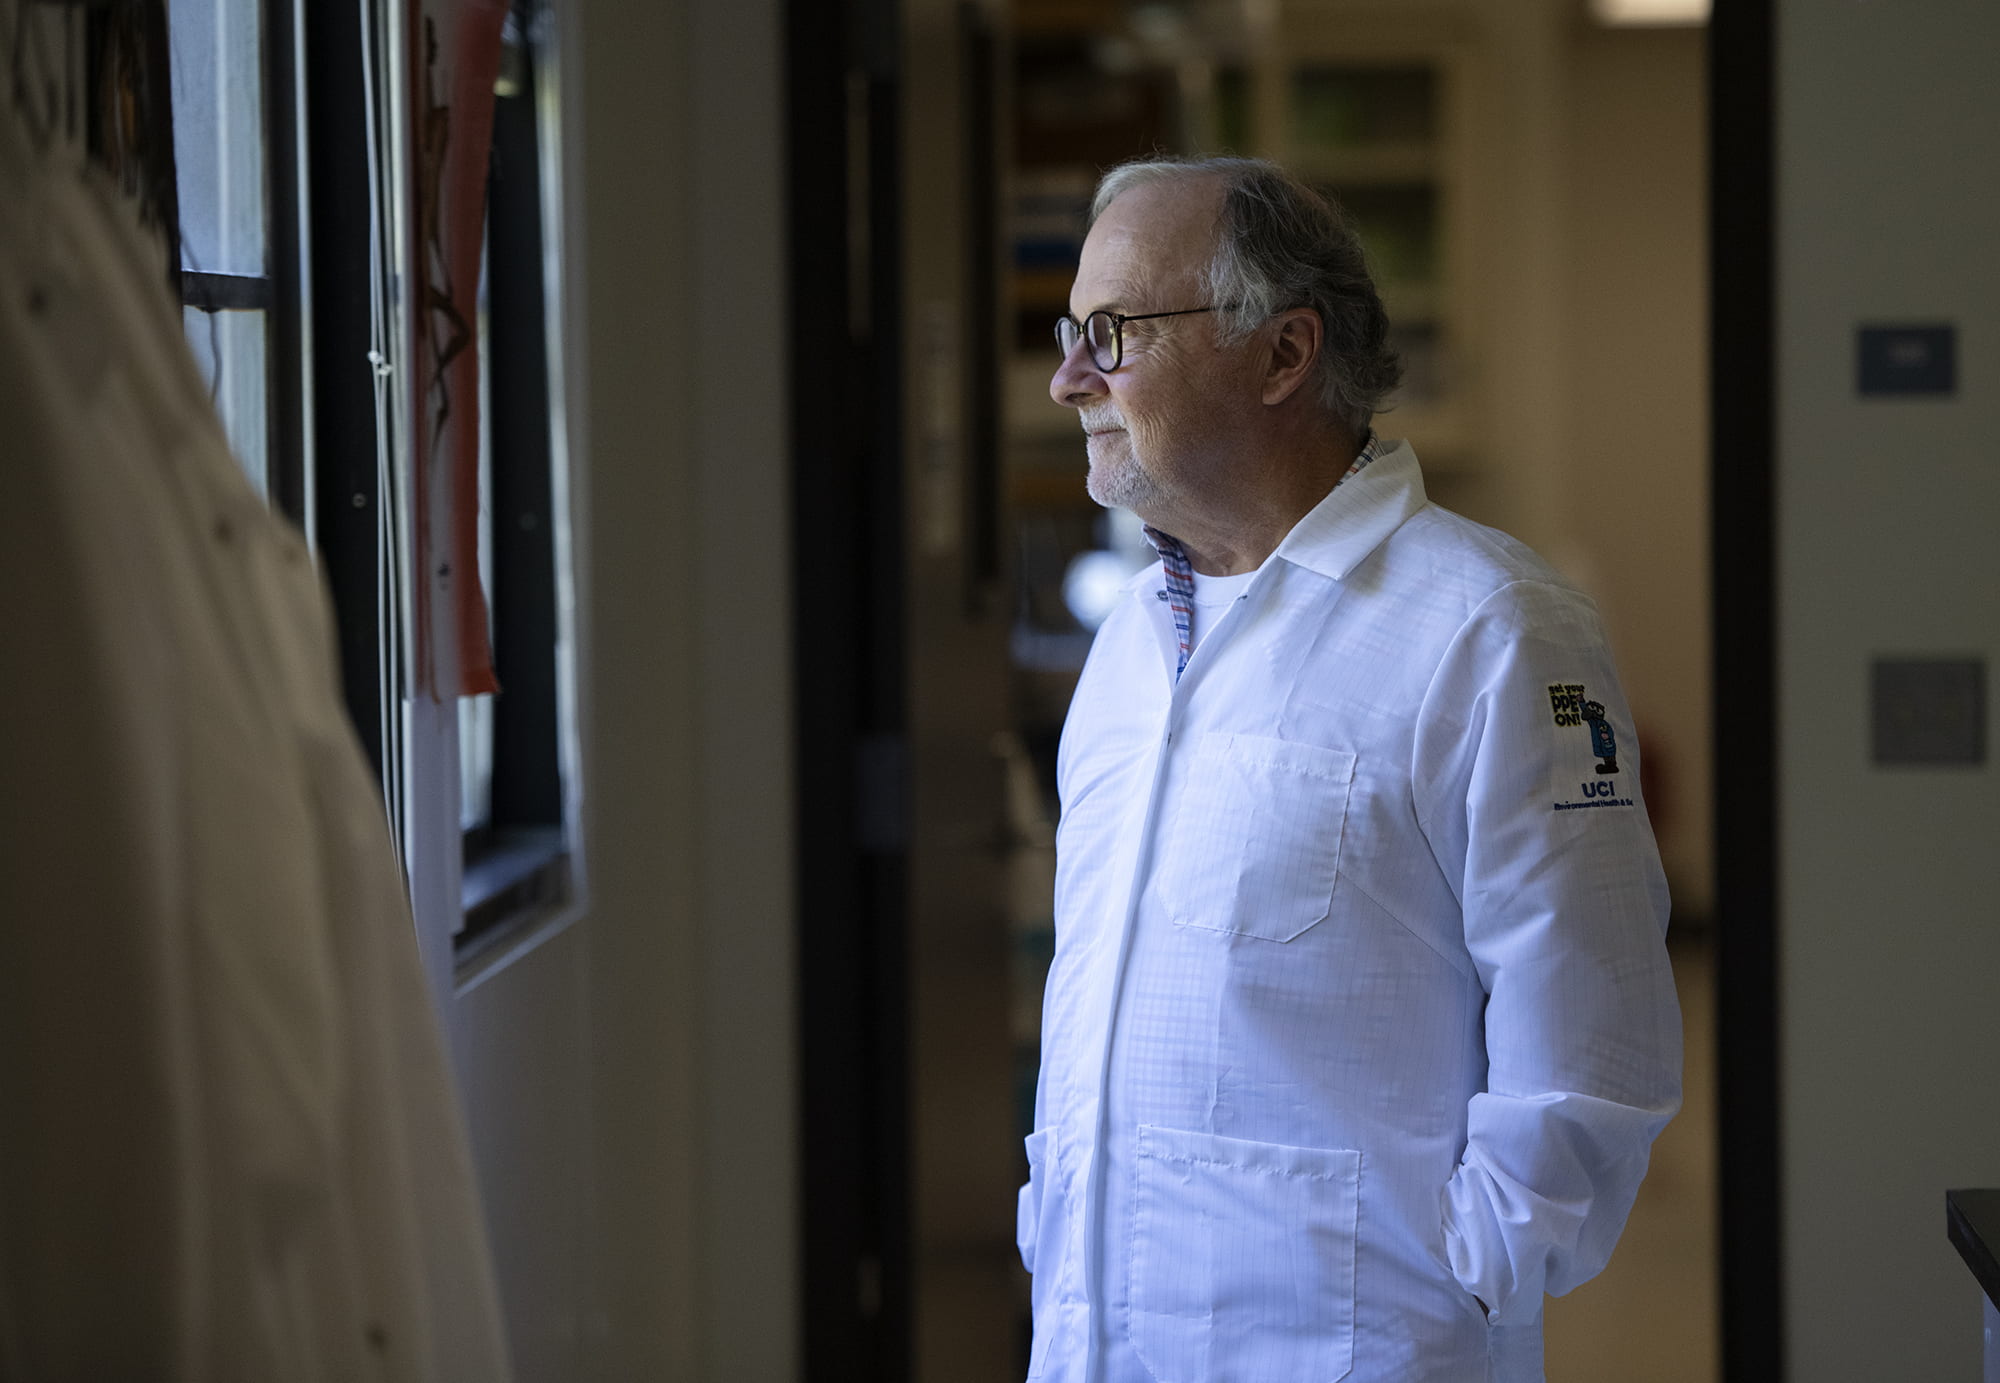 Phil Felgner, director of UCI’s Vaccine R&D Center, gazing through a window